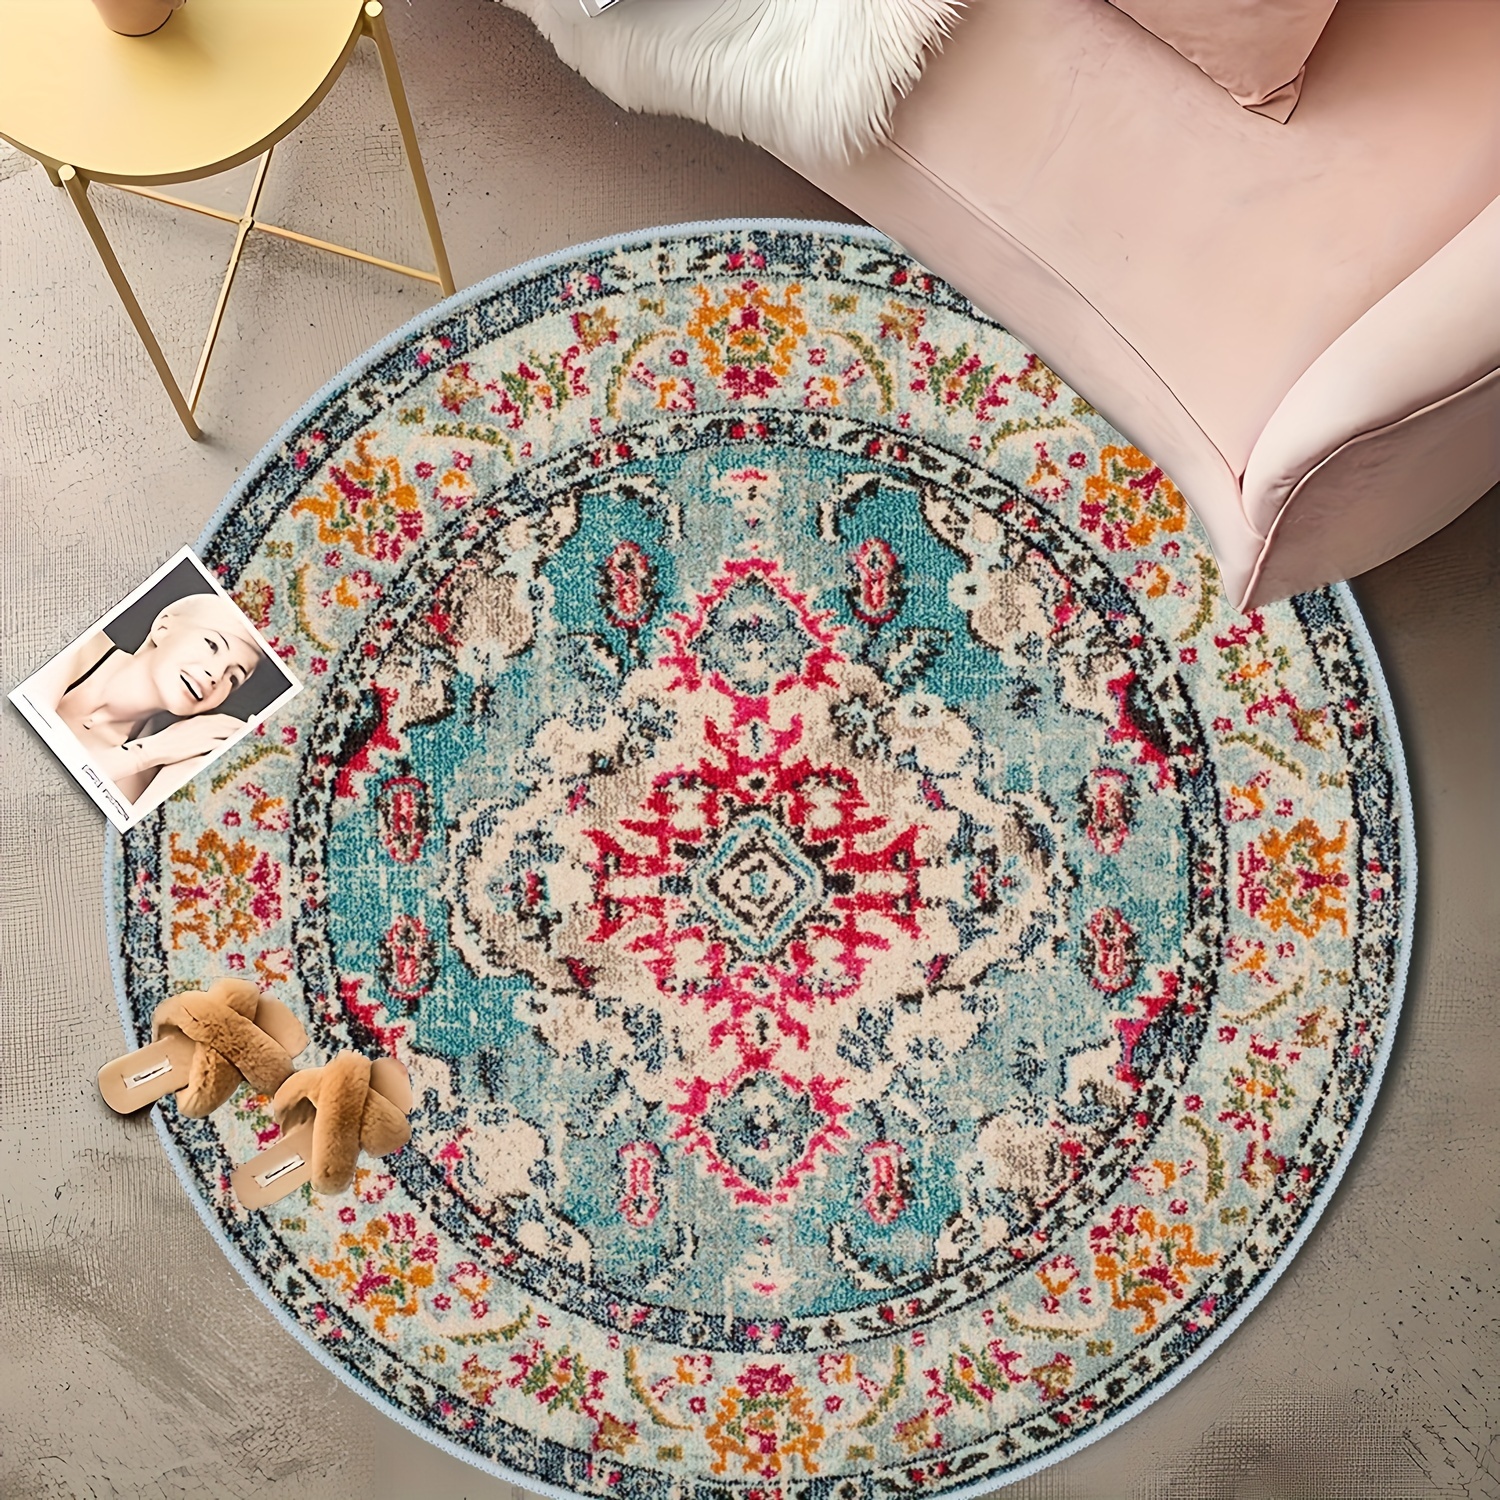 HoaMoya Colorful Cowboy Boots Hats Round Area Rug Blue Board Circle Rug  Carpet Circular Rugs Non Slip Mat for Kitchen Living Room Bedroom  Decoration 2